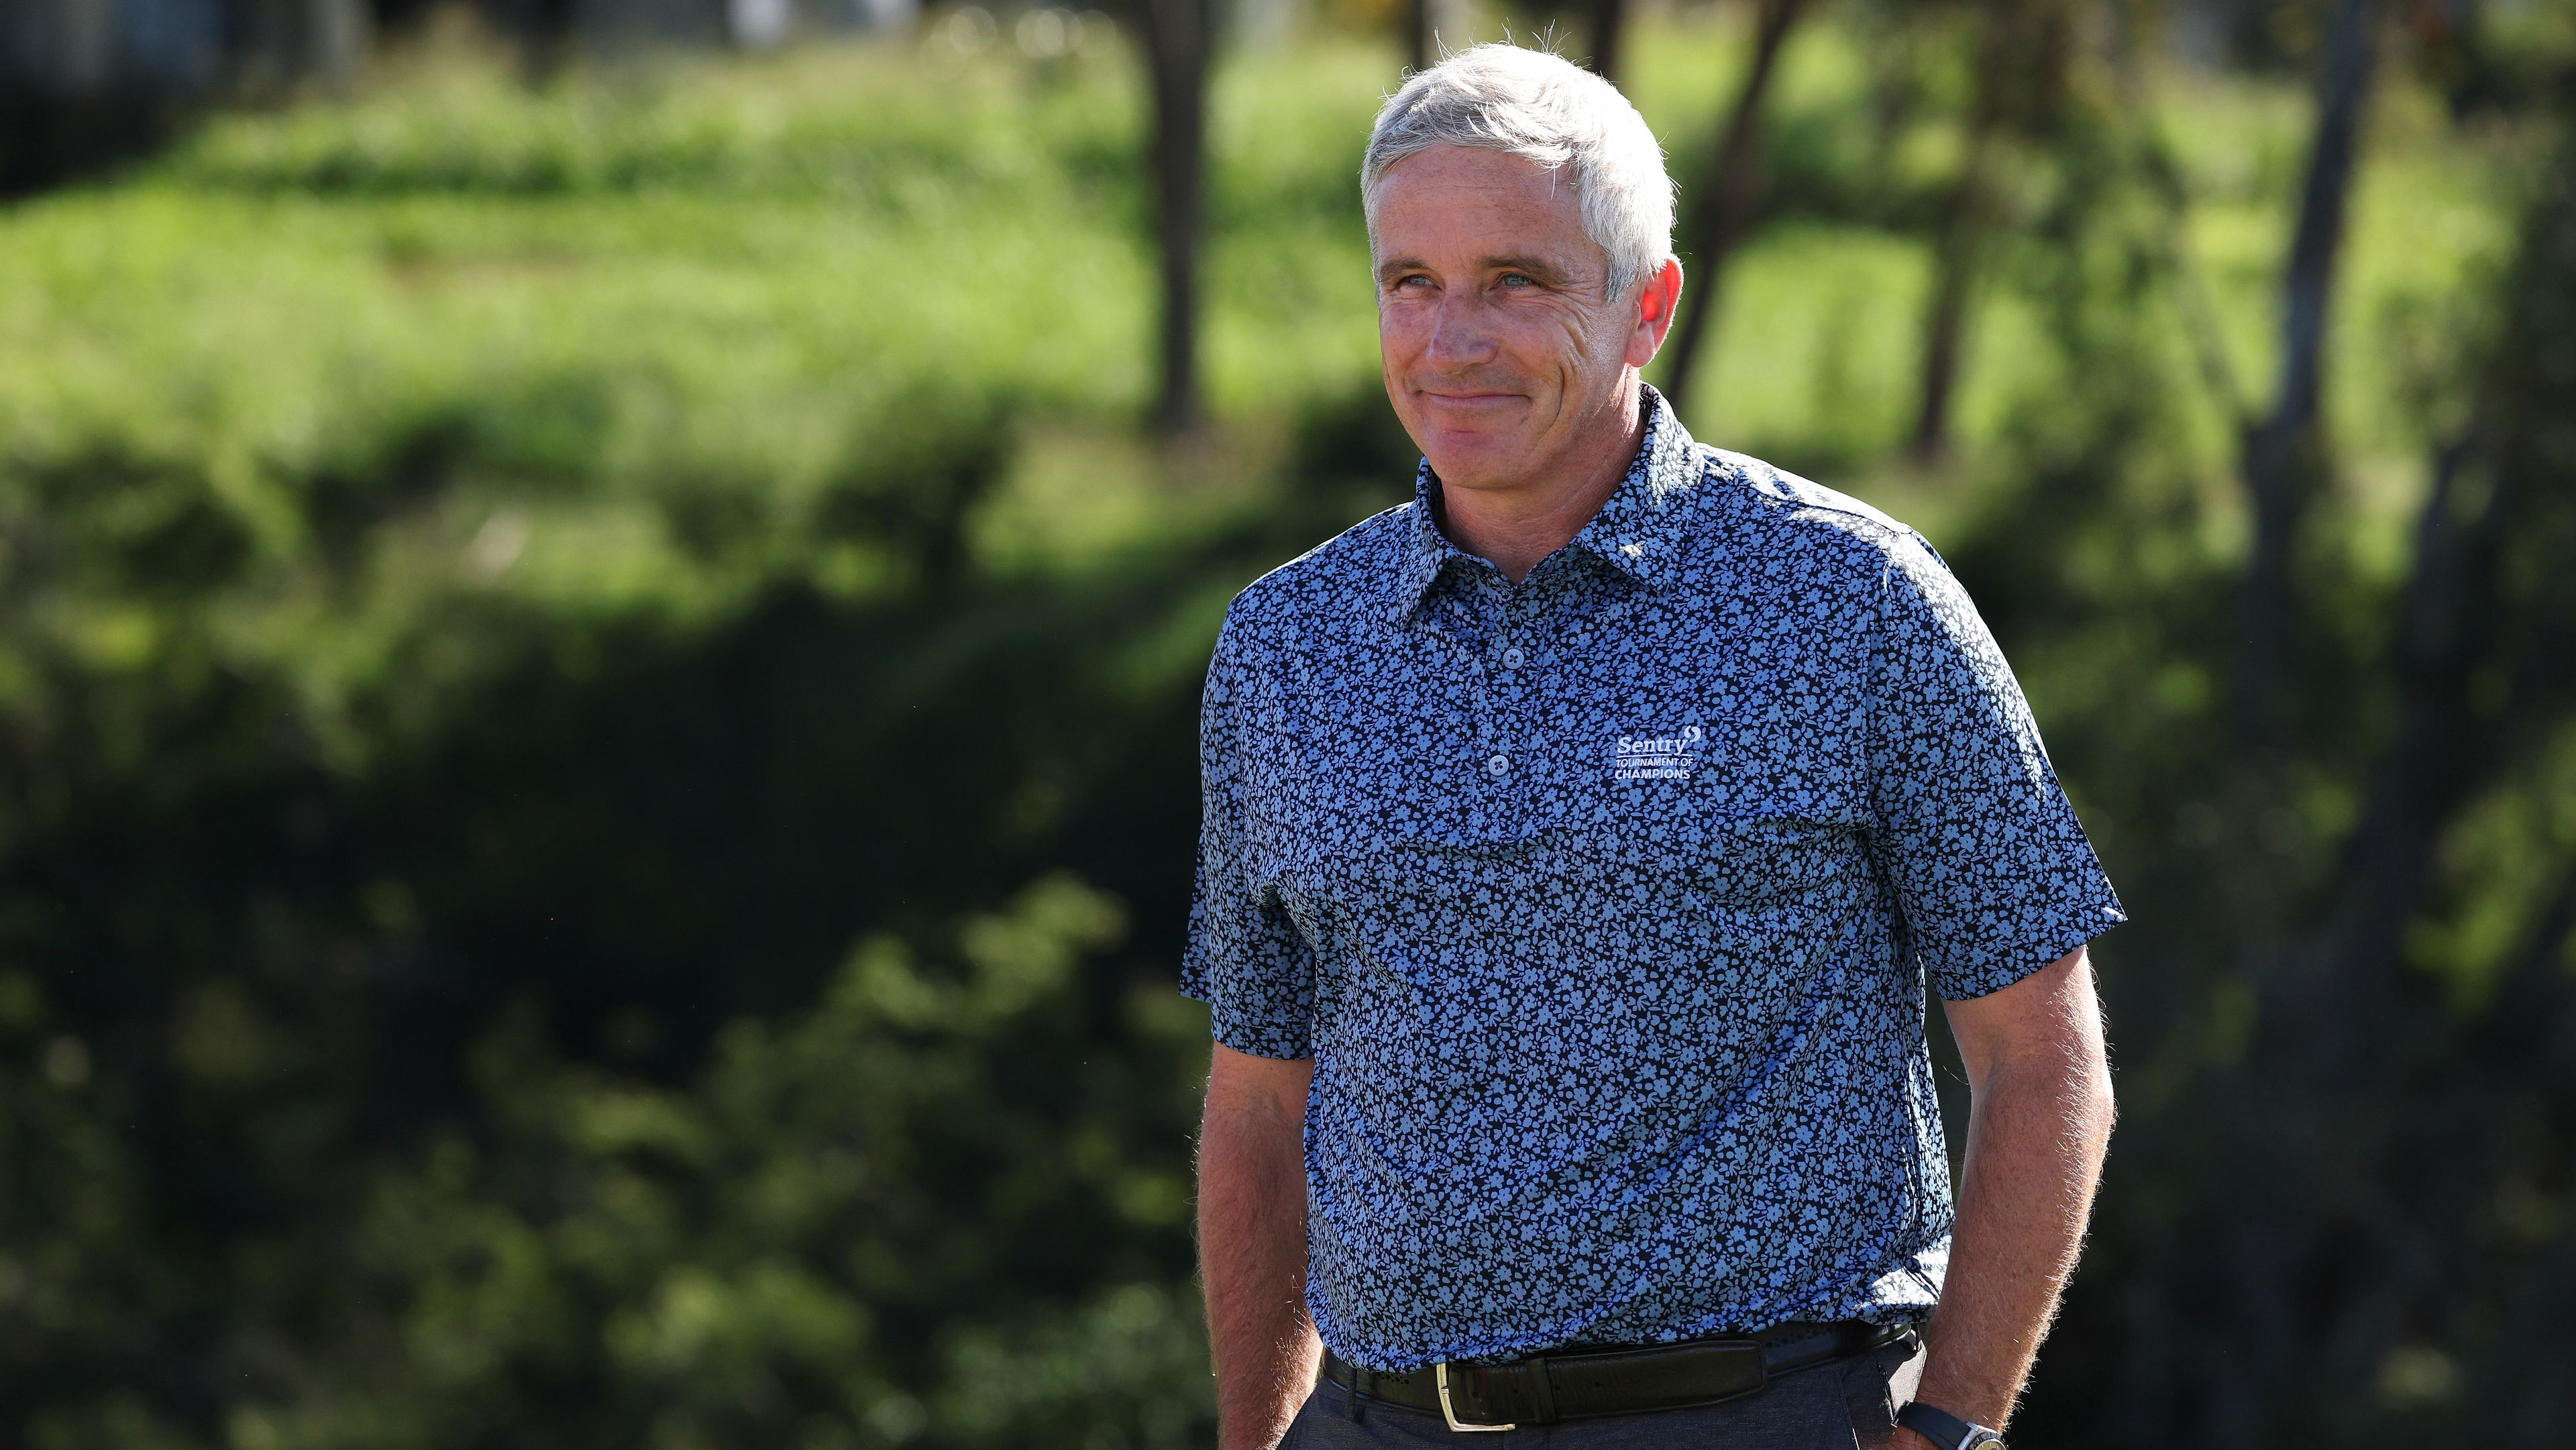 Jay Monahan, PGA TOUR Commissioner, looks on during the trophy ceremony after the final round of the Sentry Tournament of Champions at Plantation Course at Kapalua Golf Club on January 08, 2023 in Lahaina, Hawaii. (Photo by Harry How/Getty Images)